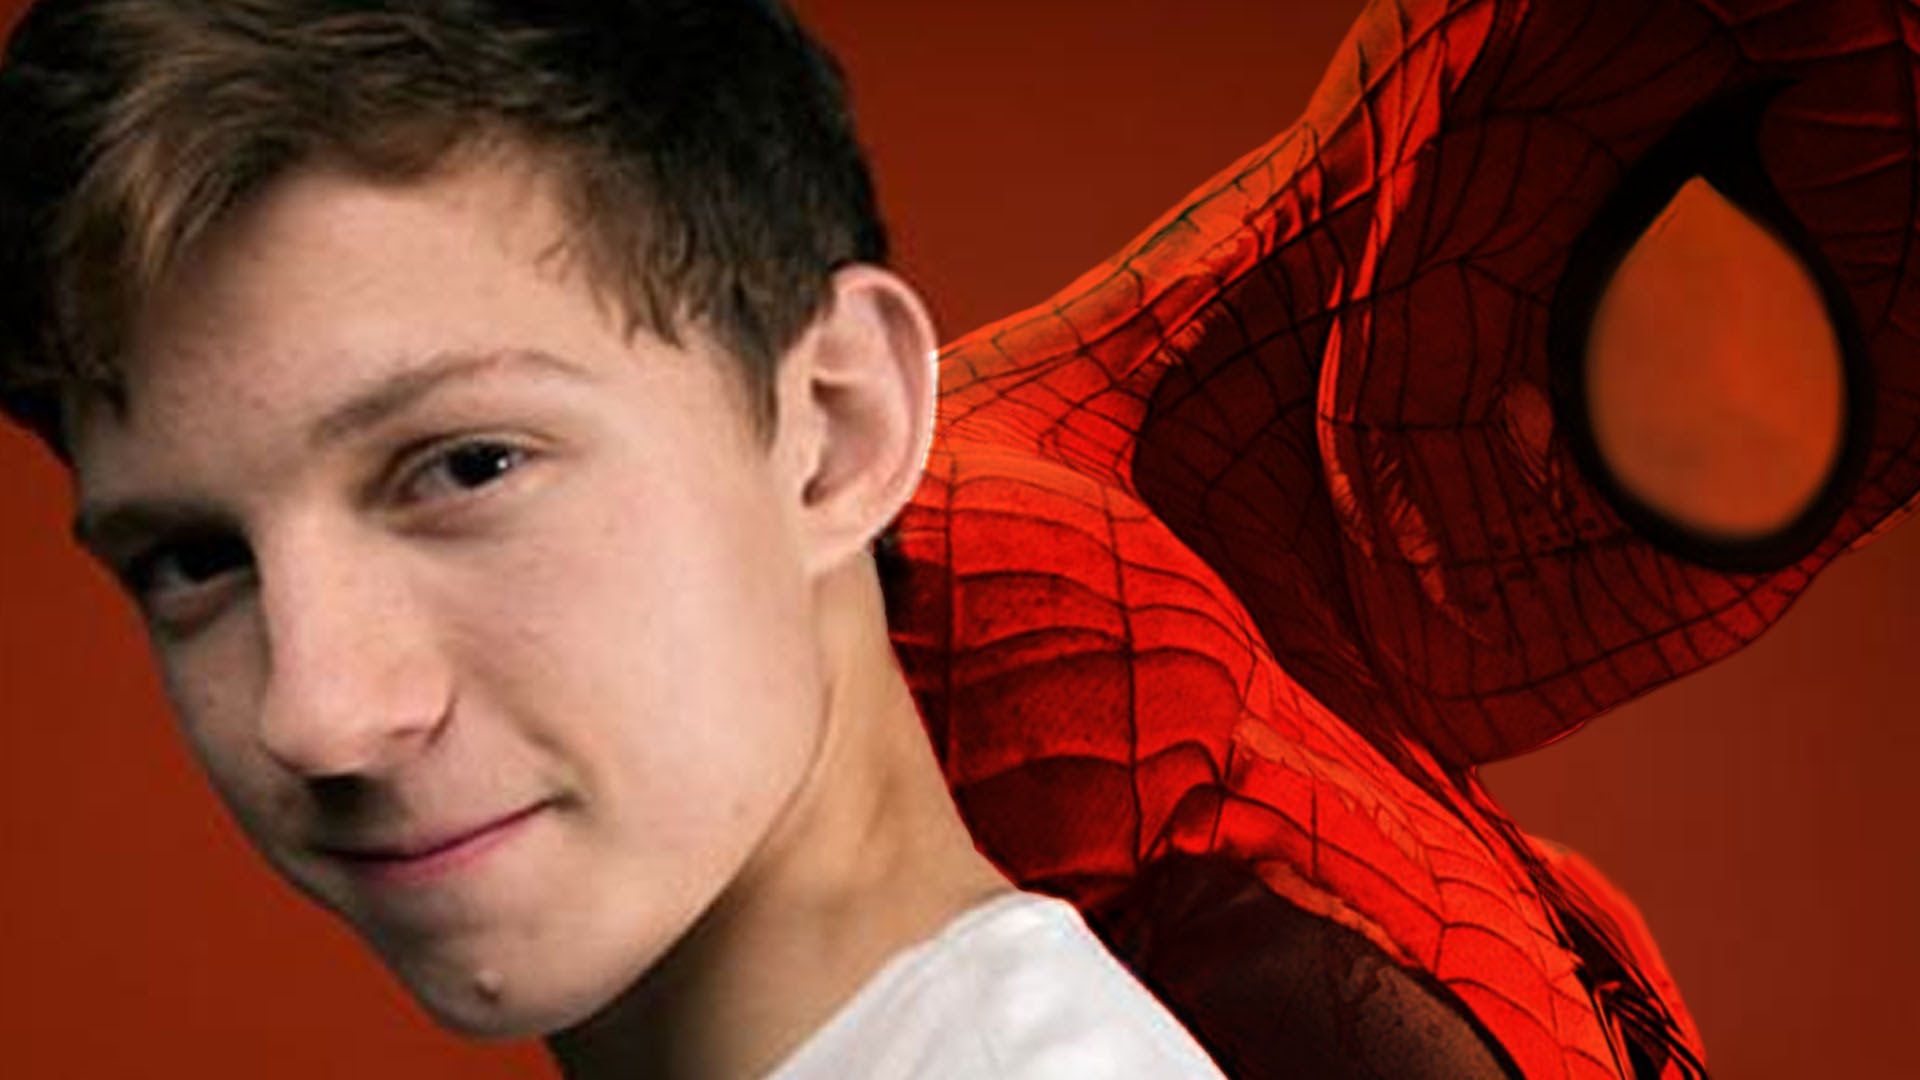 Tom Holland HD Wallpaper Free Download in High Quality and Resolution